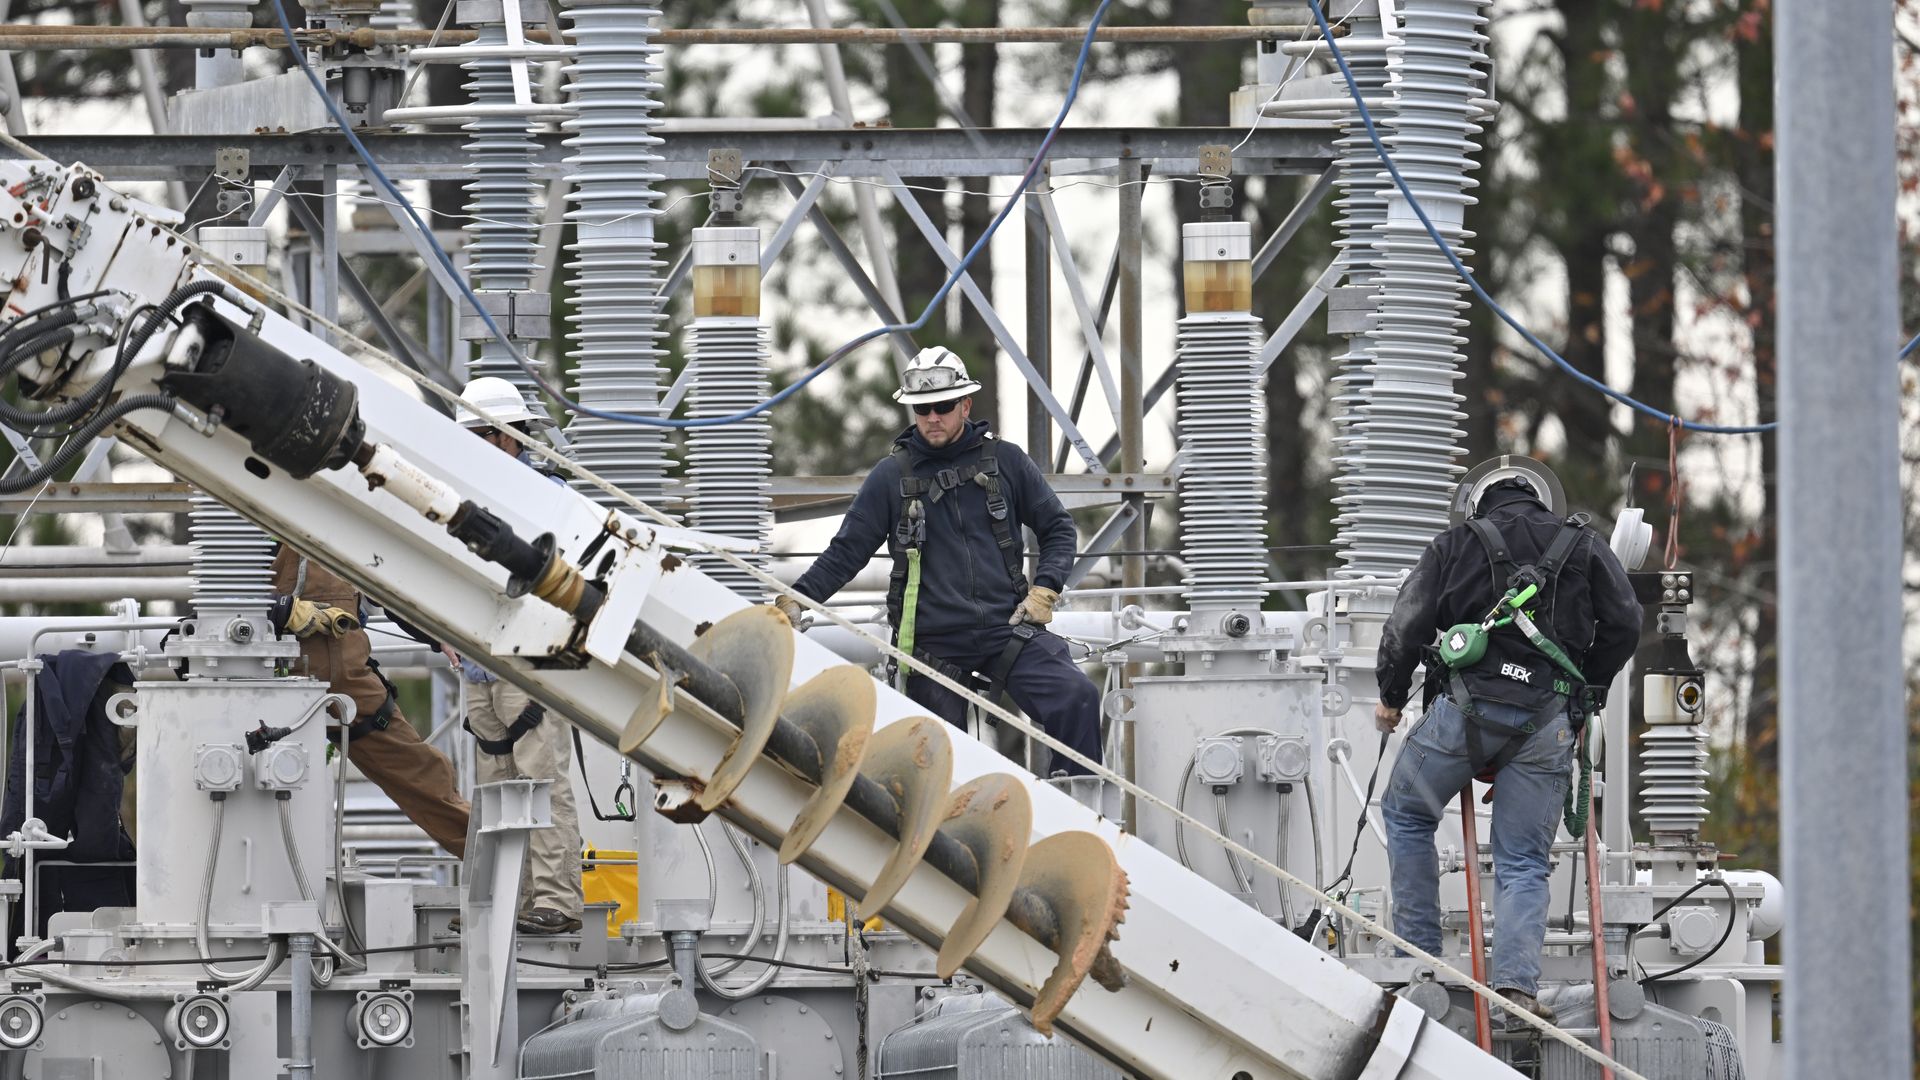 Power grid attacks: Rising physical incidents raise alarm among